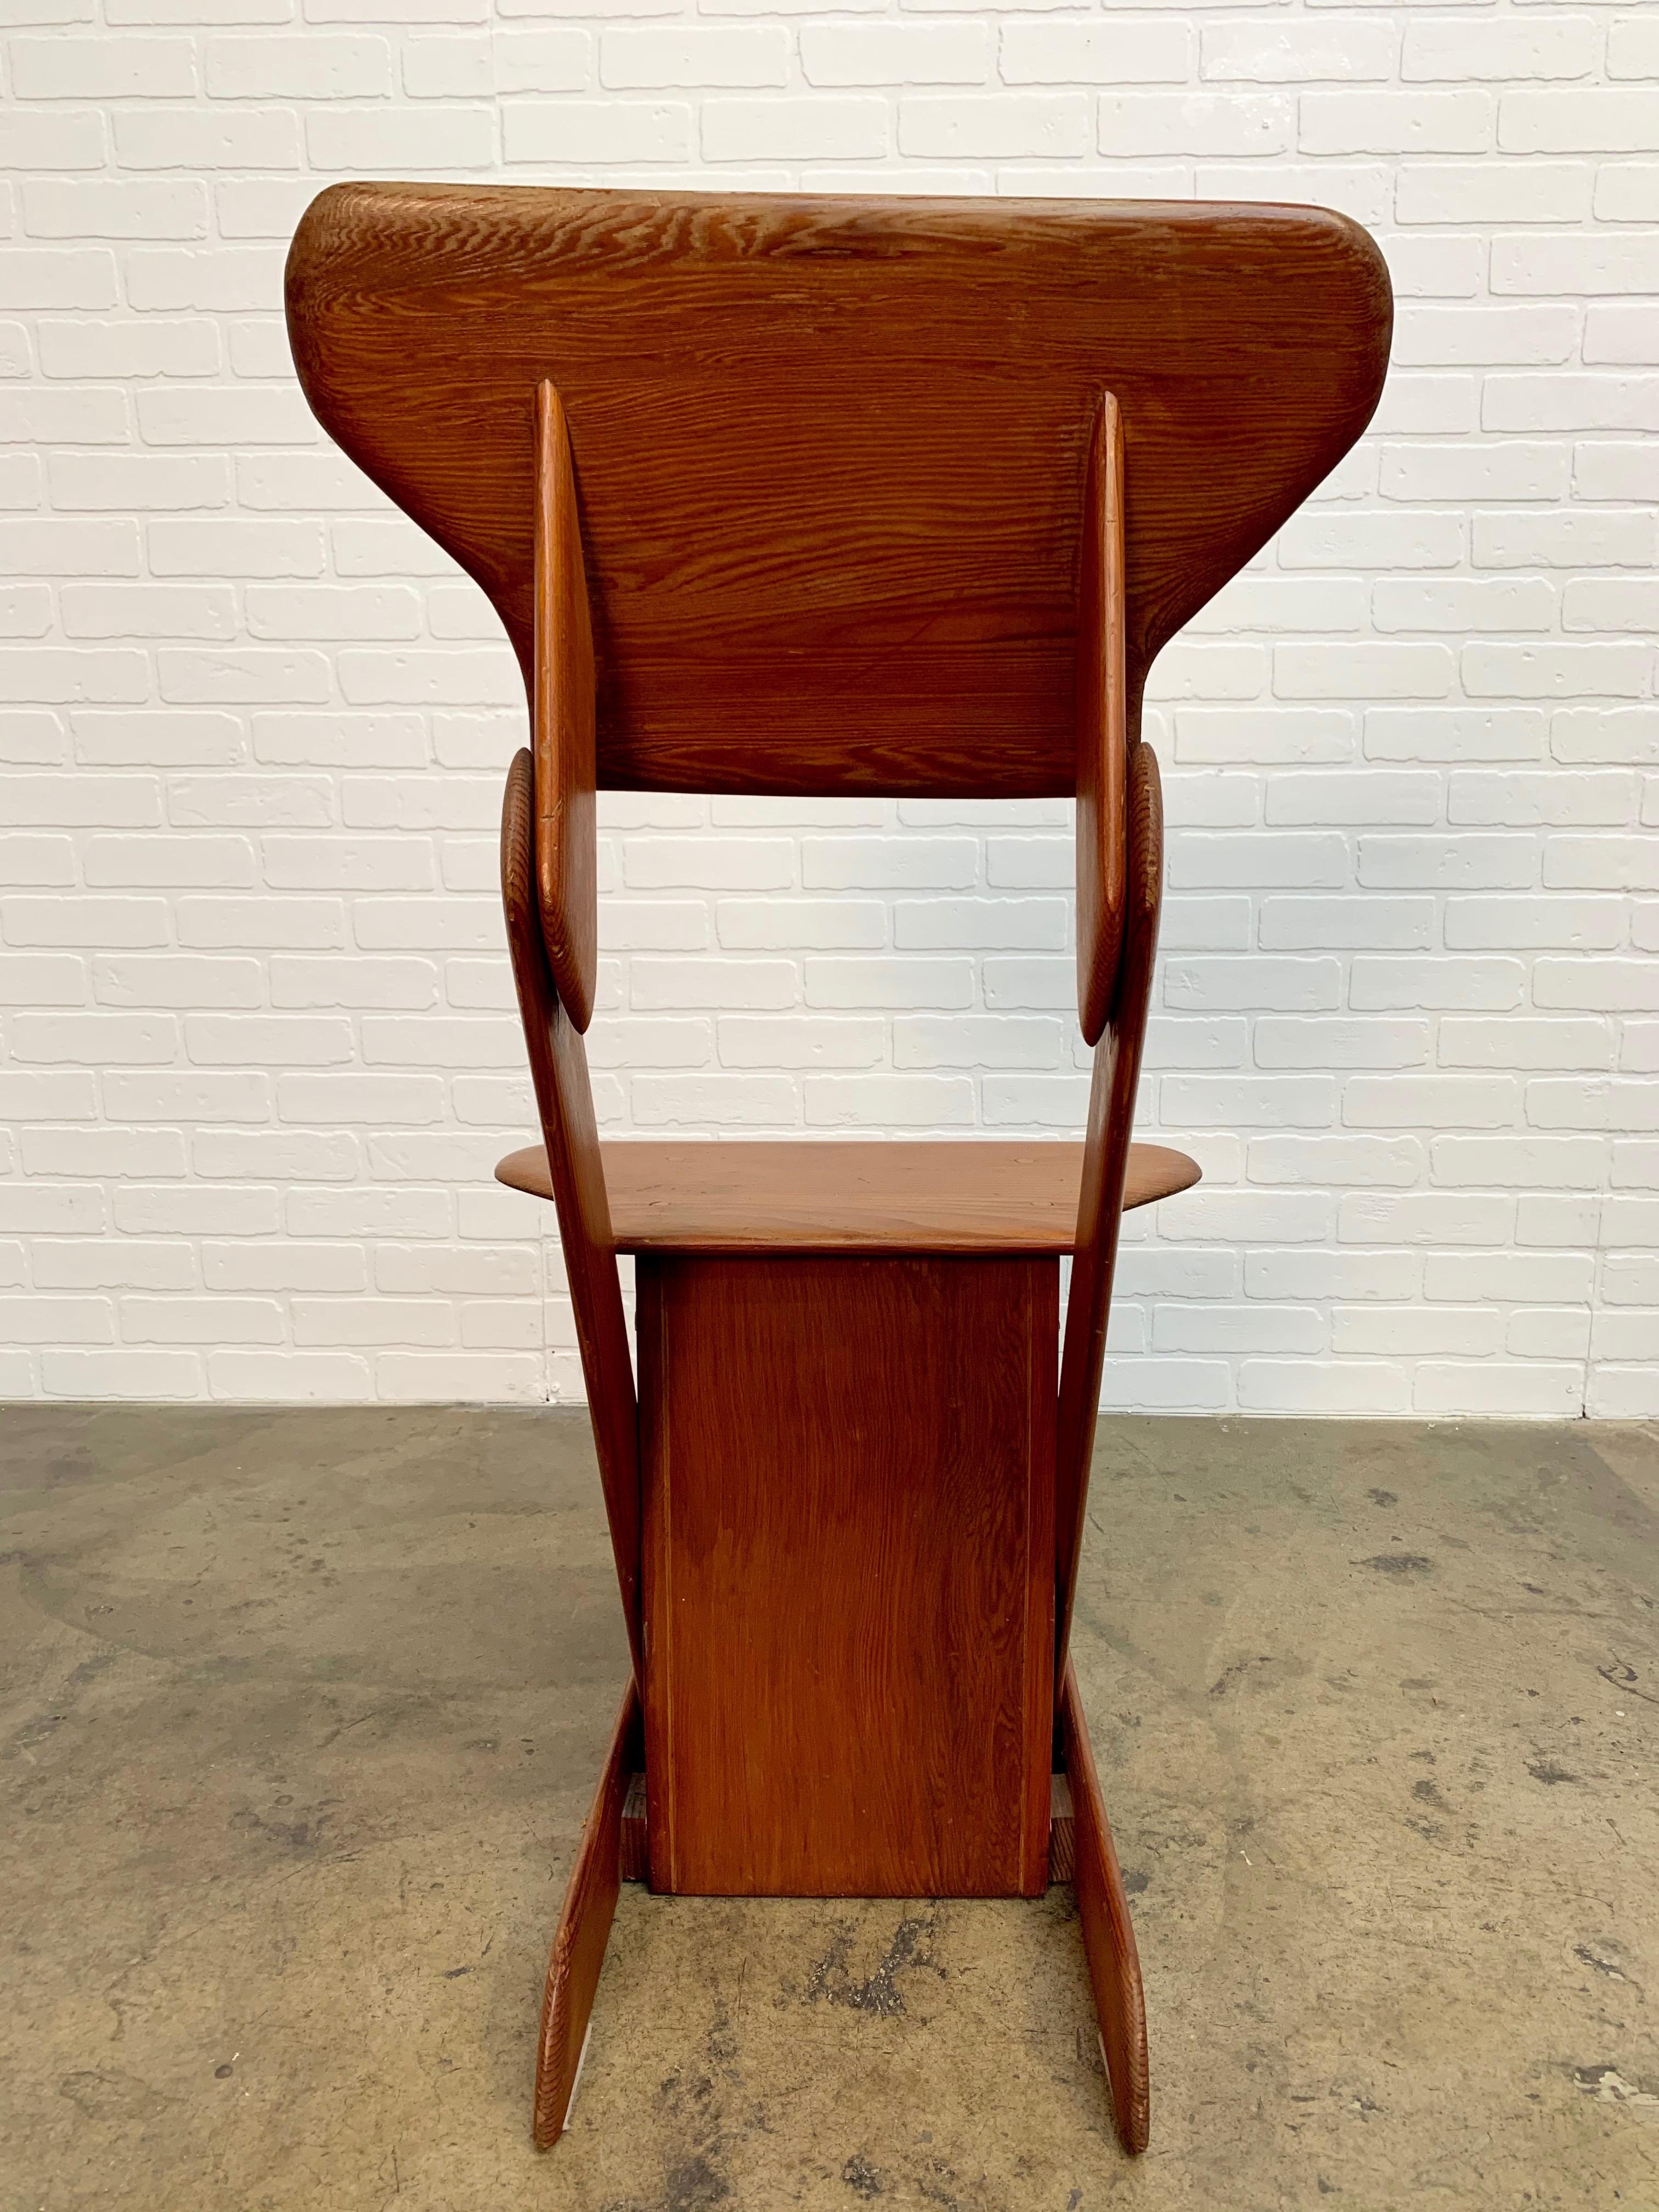 20th Century Modernist Rustic Dining Chairs